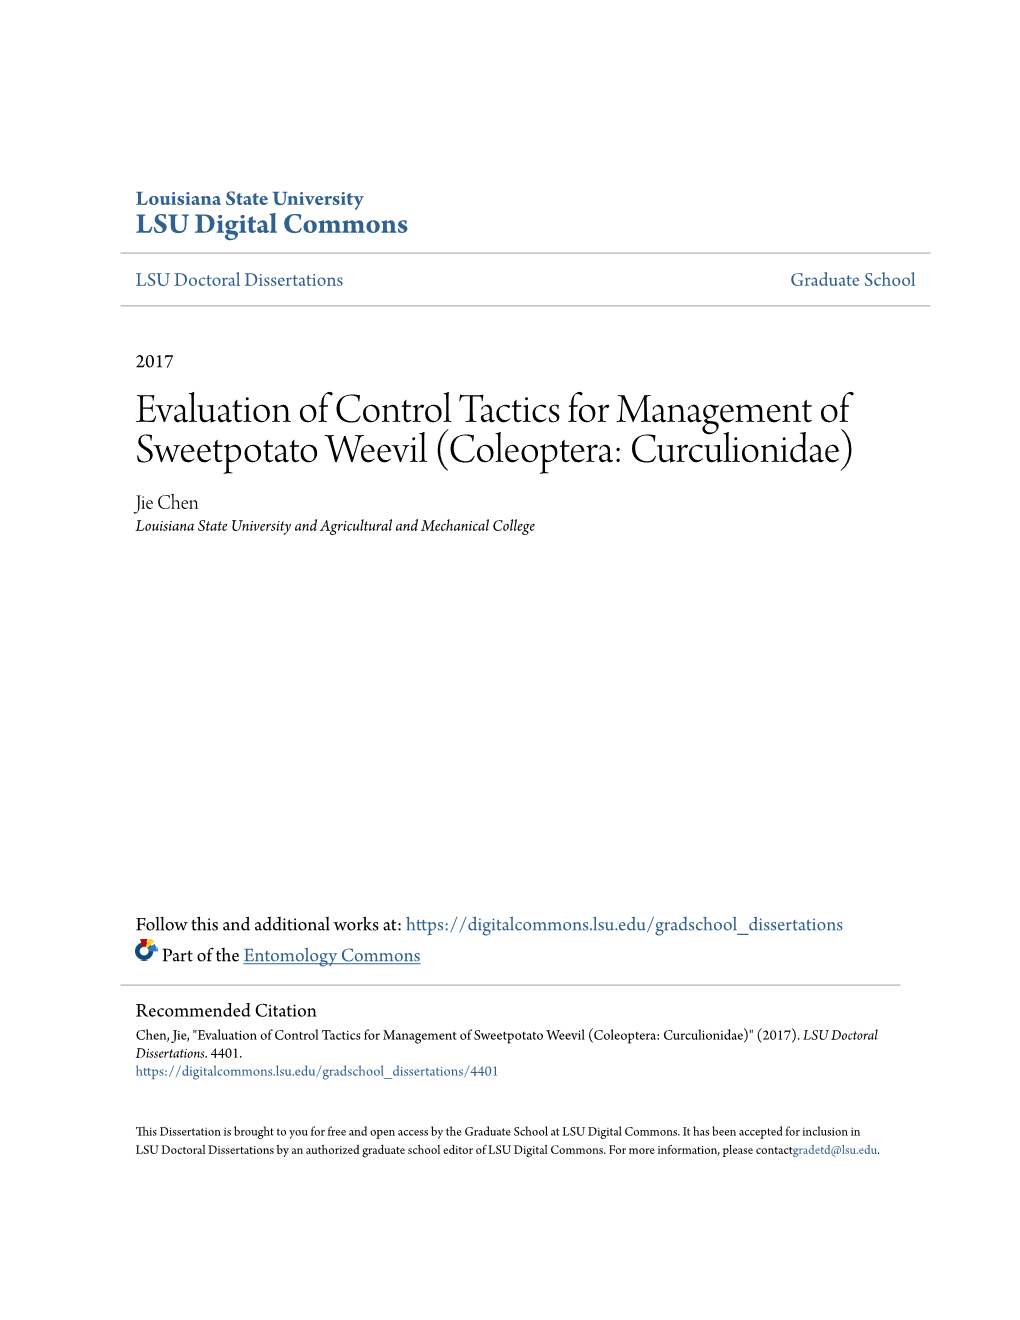 Evaluation of Control Tactics for Management of Sweetpotato